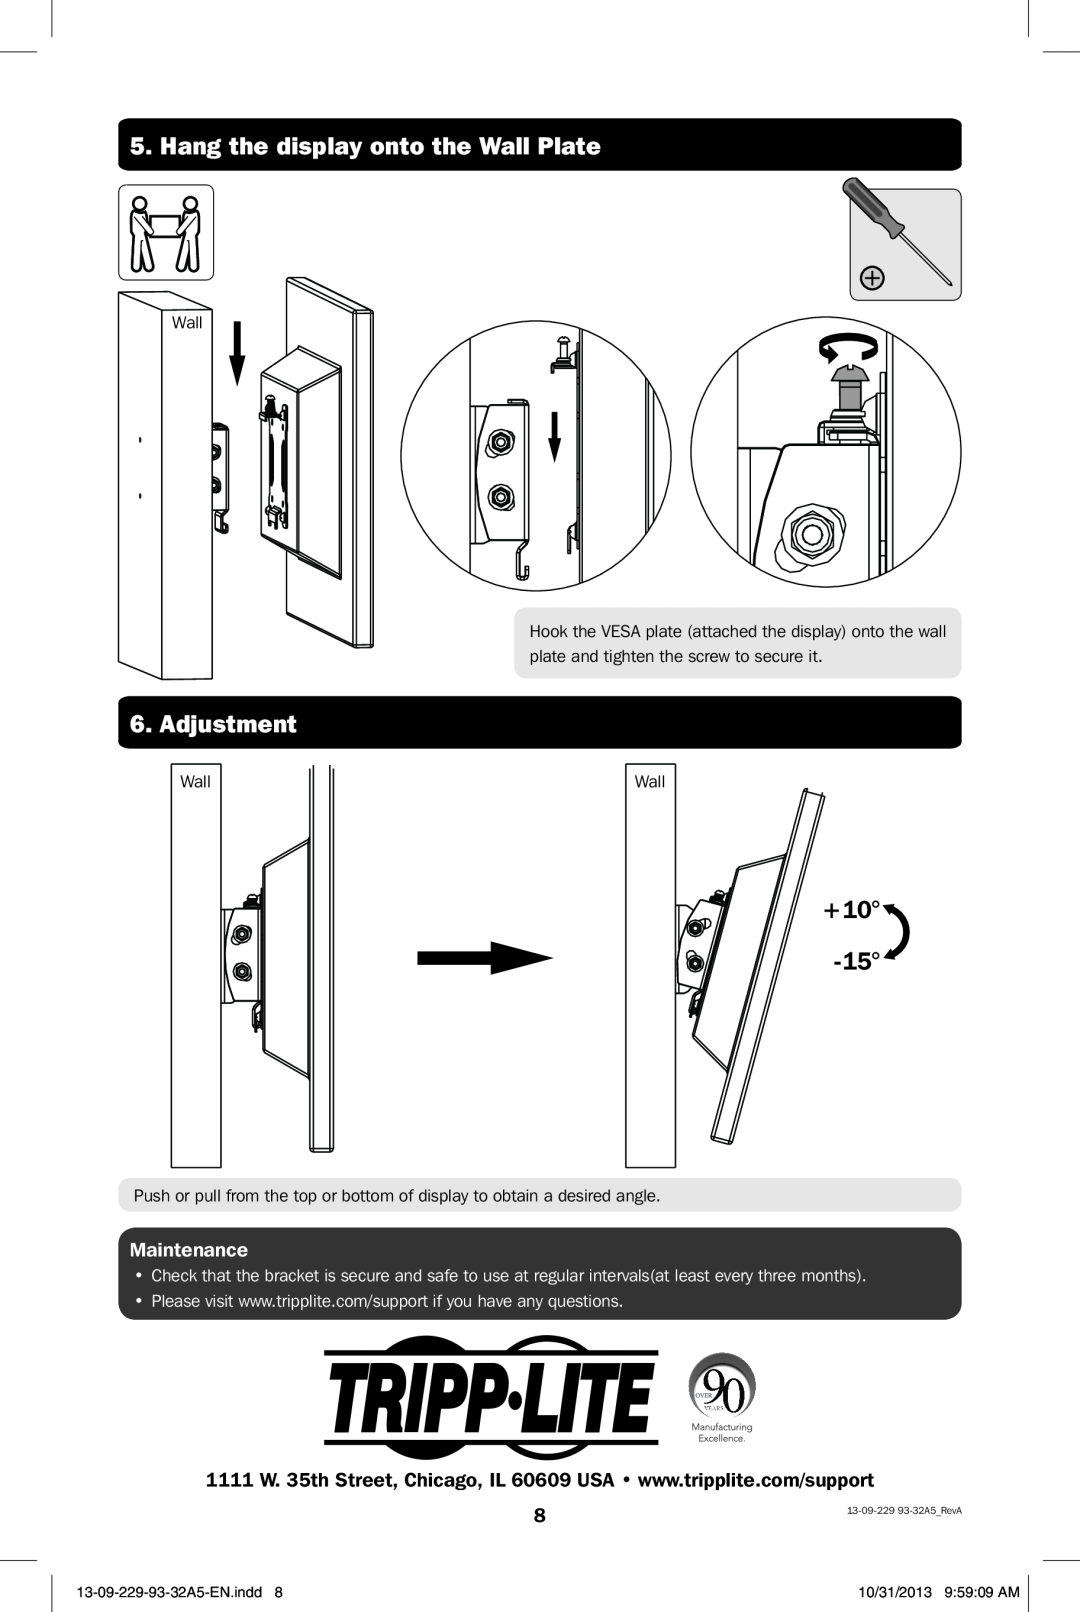 Tripp Lite DWT1323S owner manual Hang the display onto the Wall Plate, Adjustment, Maintenance, 13-09-229-93-32A5-EN.indd 